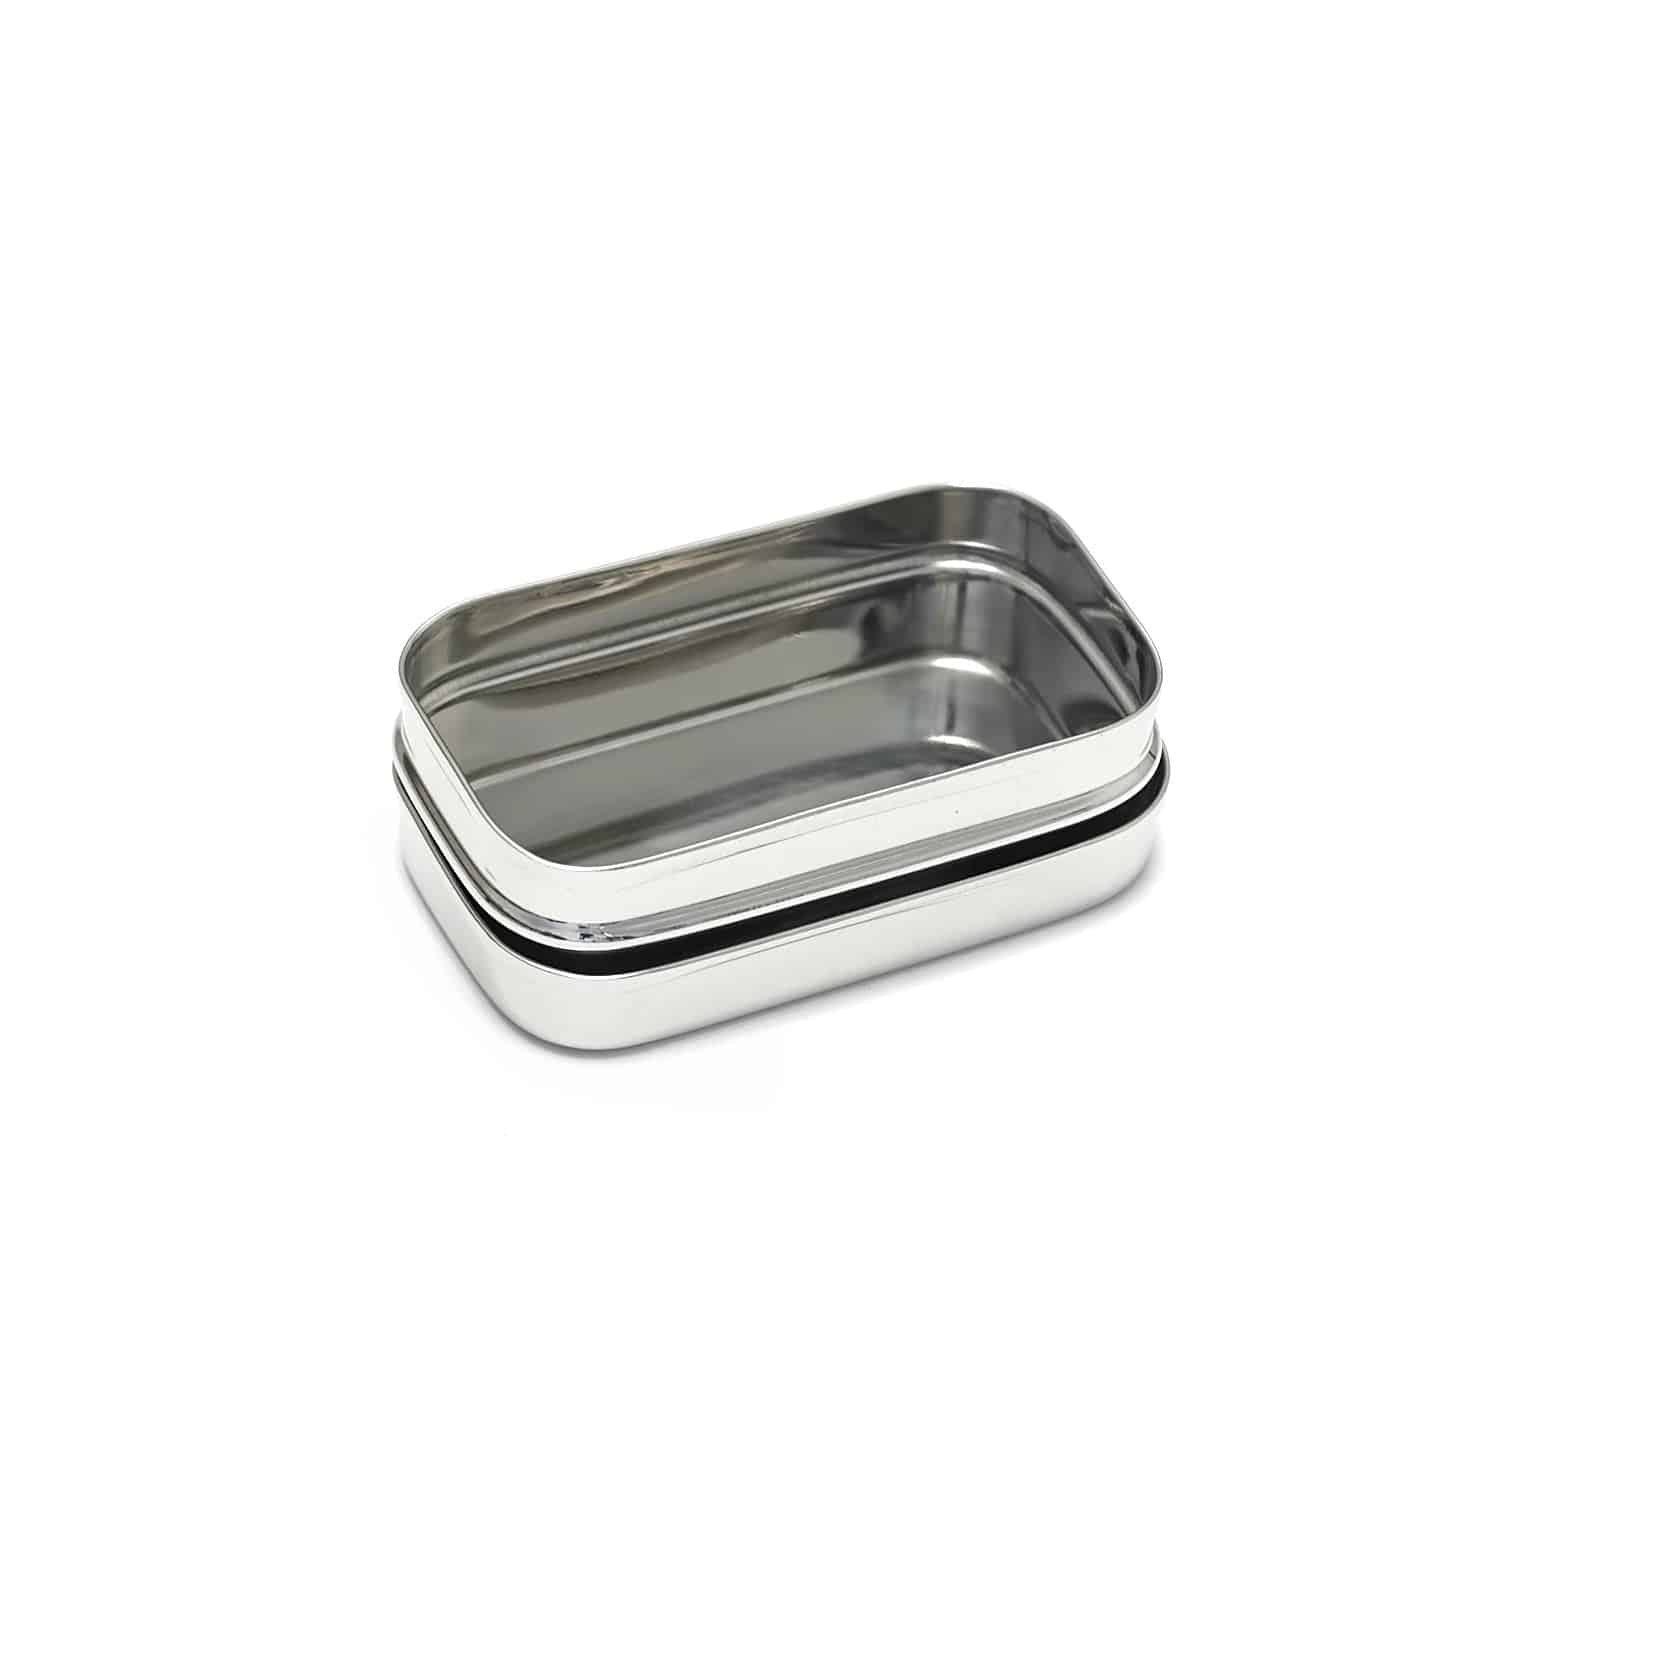 Meals In Steel Small Snack Box Stainless Steel - LunchBox Inc.